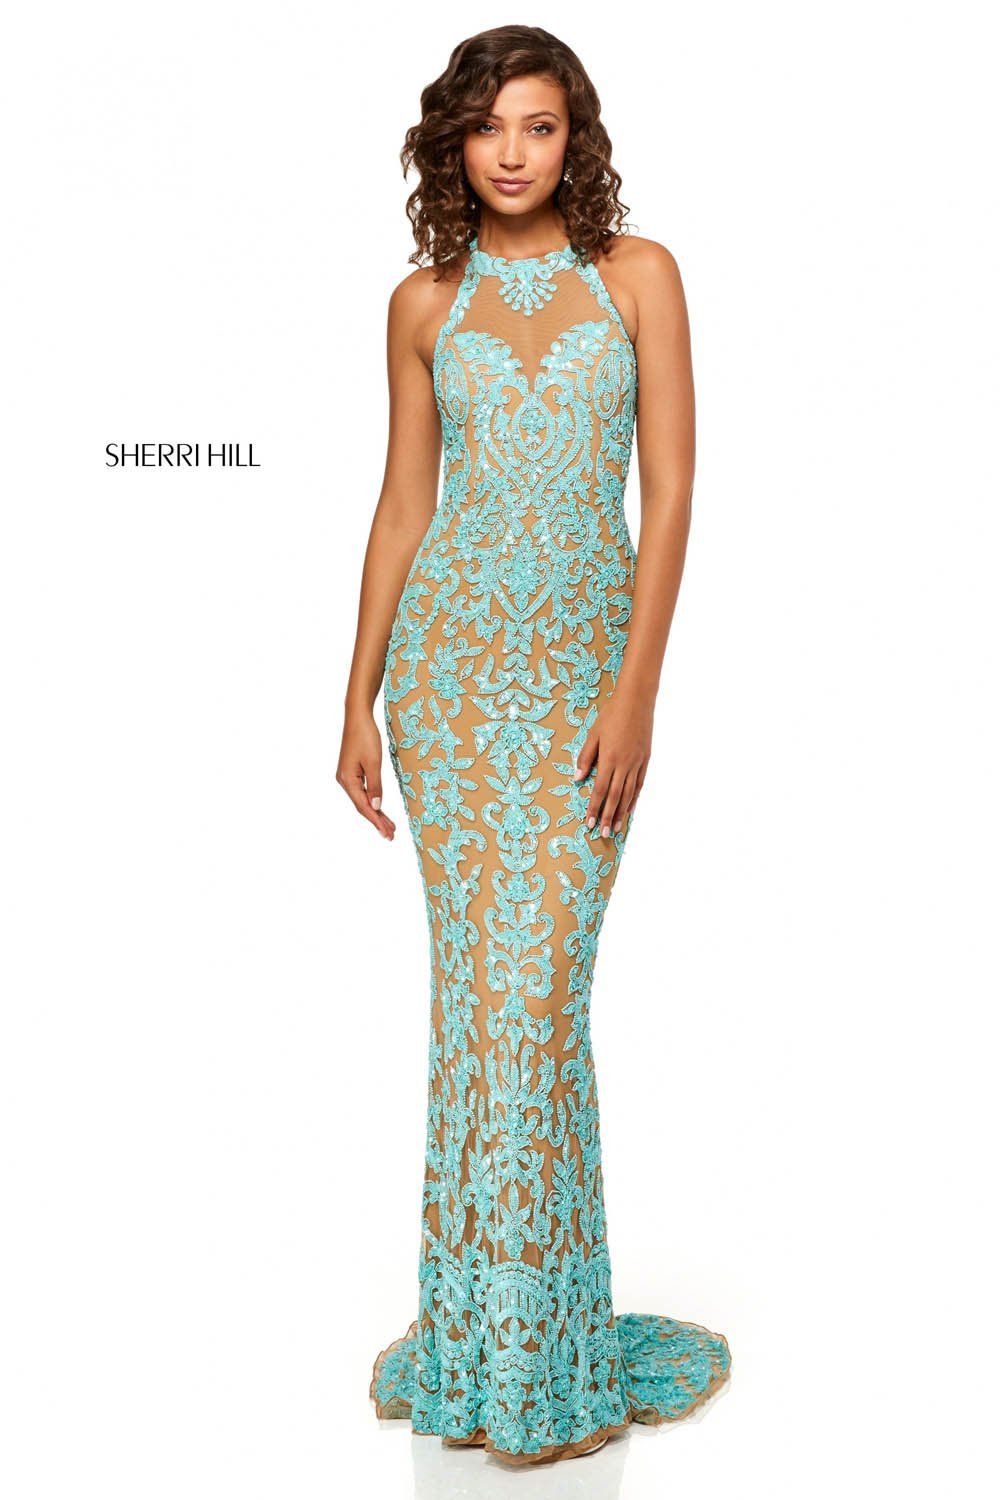 Sherri Hill 52527 dress images in these colors: Nude Aqua, Light Gold, Periwinkle Pink, Nude Coral, Nude Ivory, Black, Burgundy.